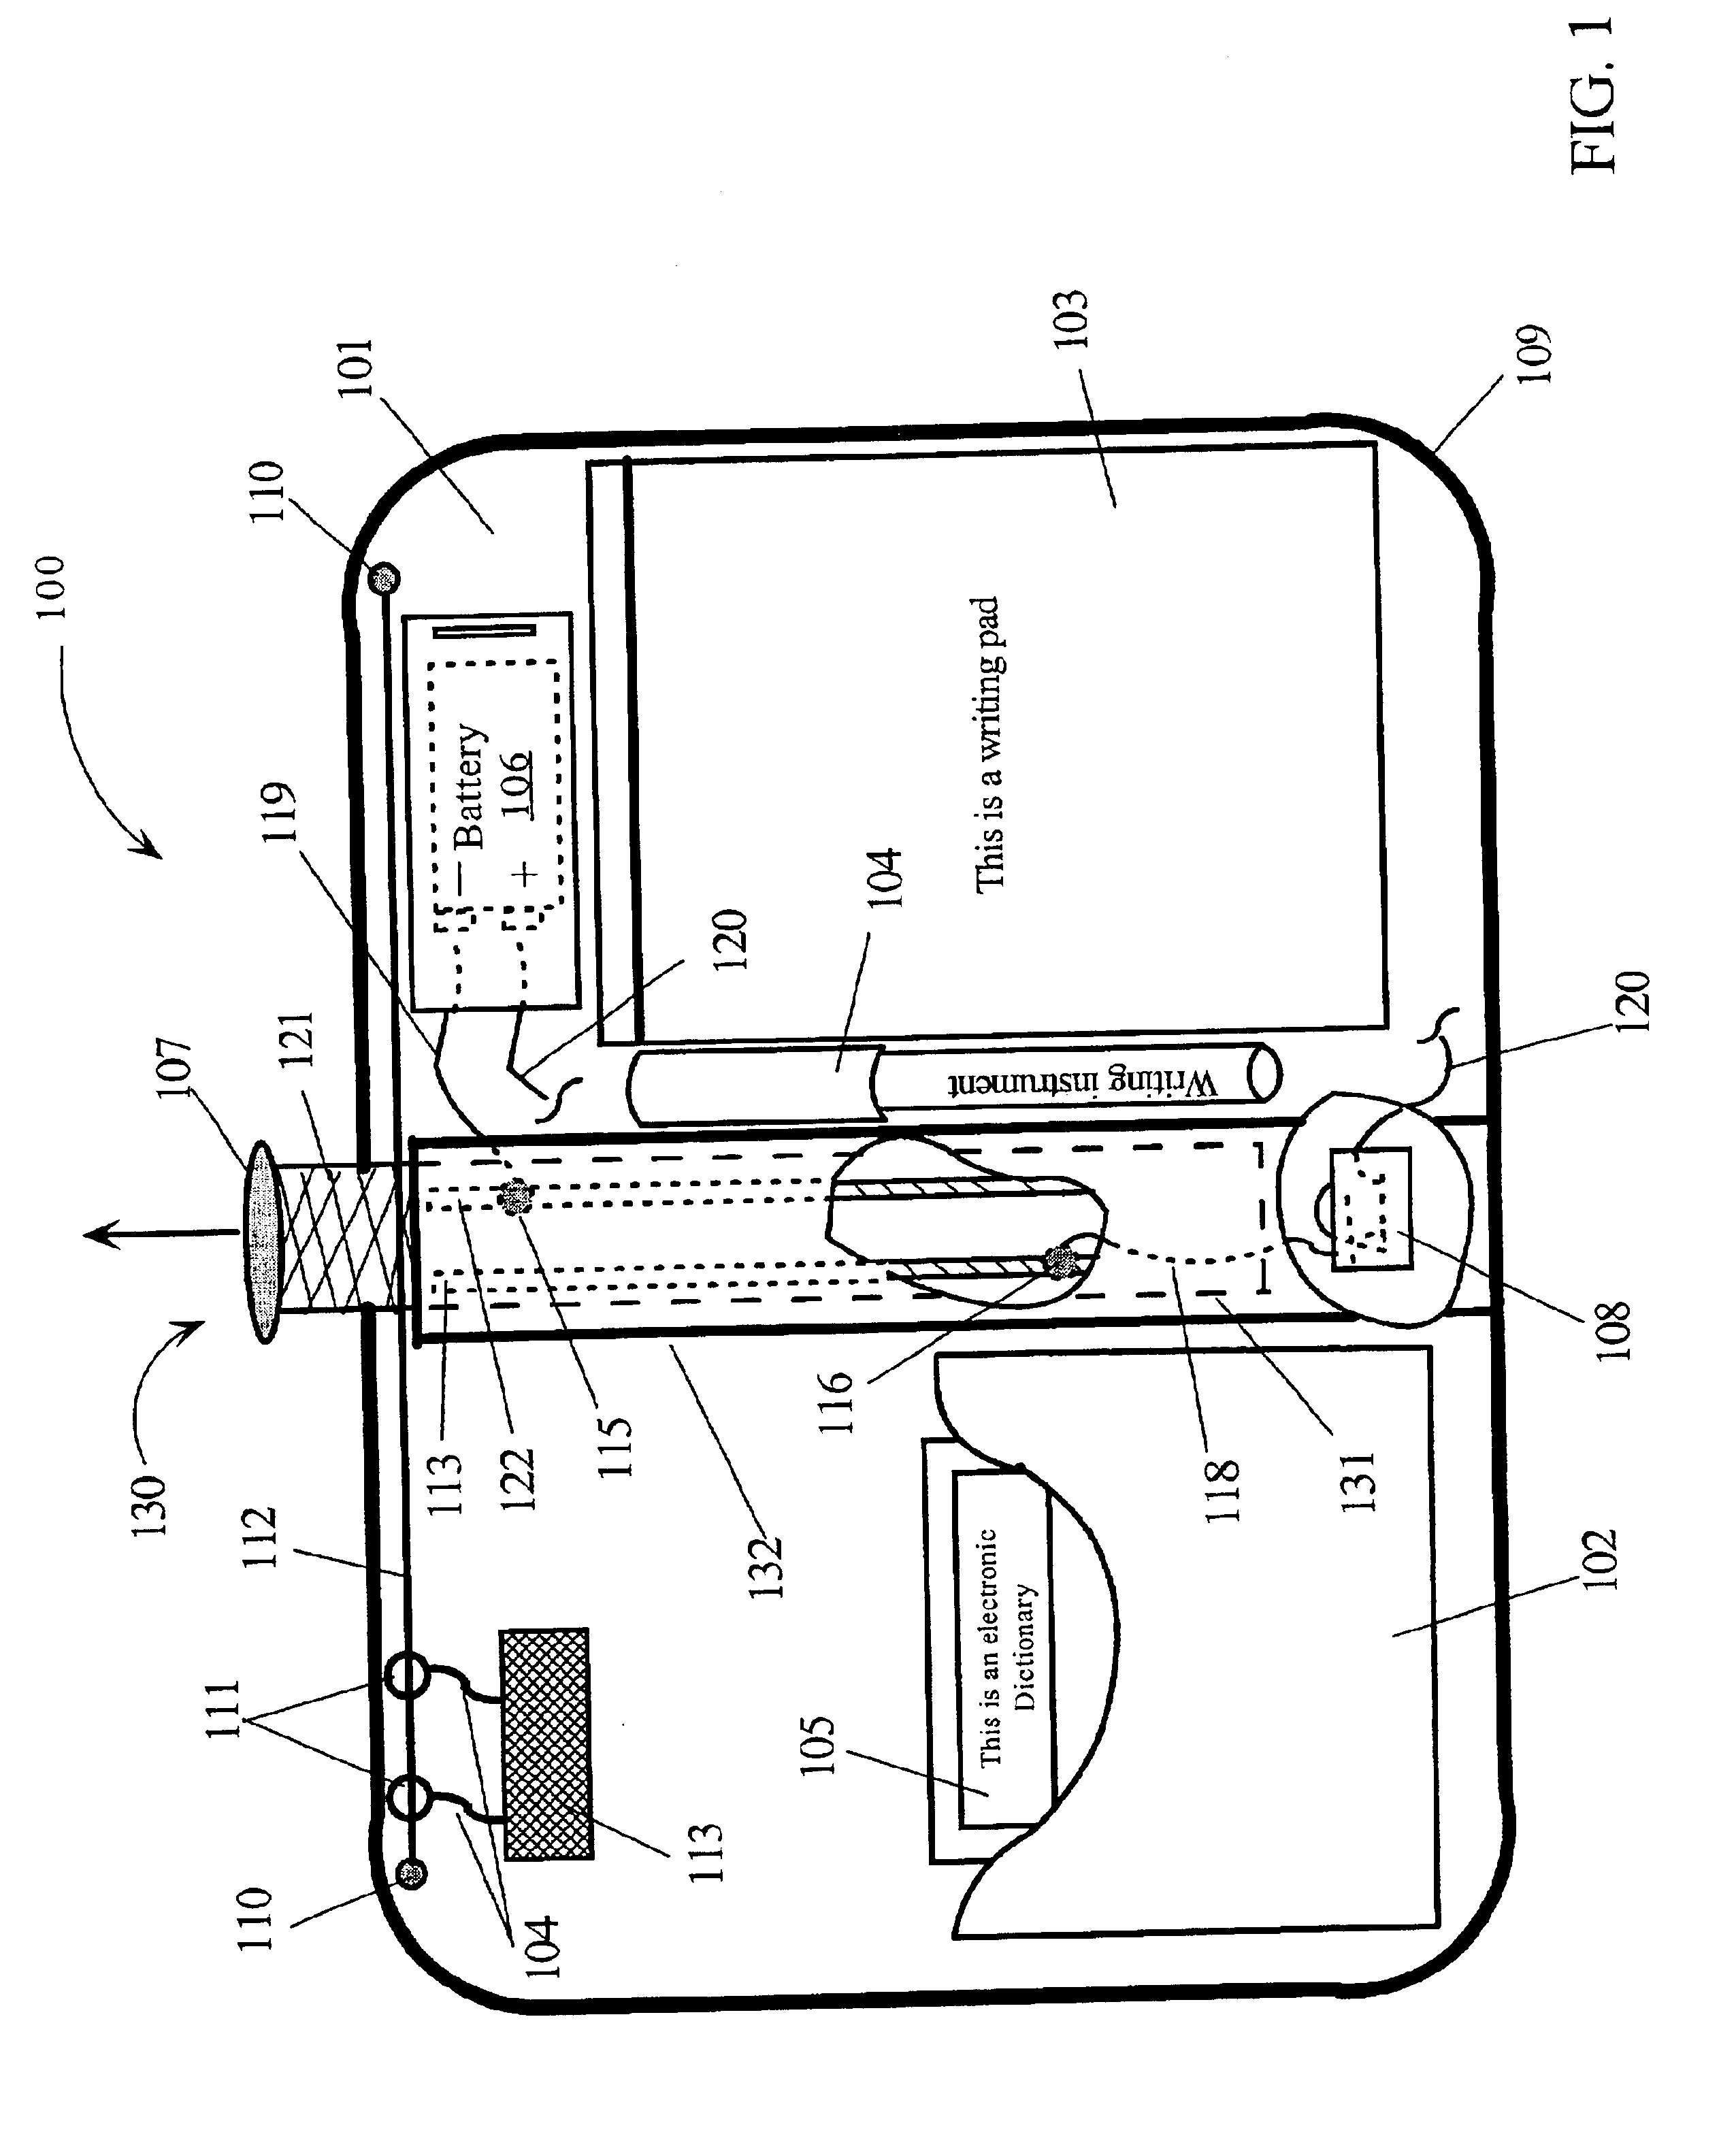 Reading and writing assistant device